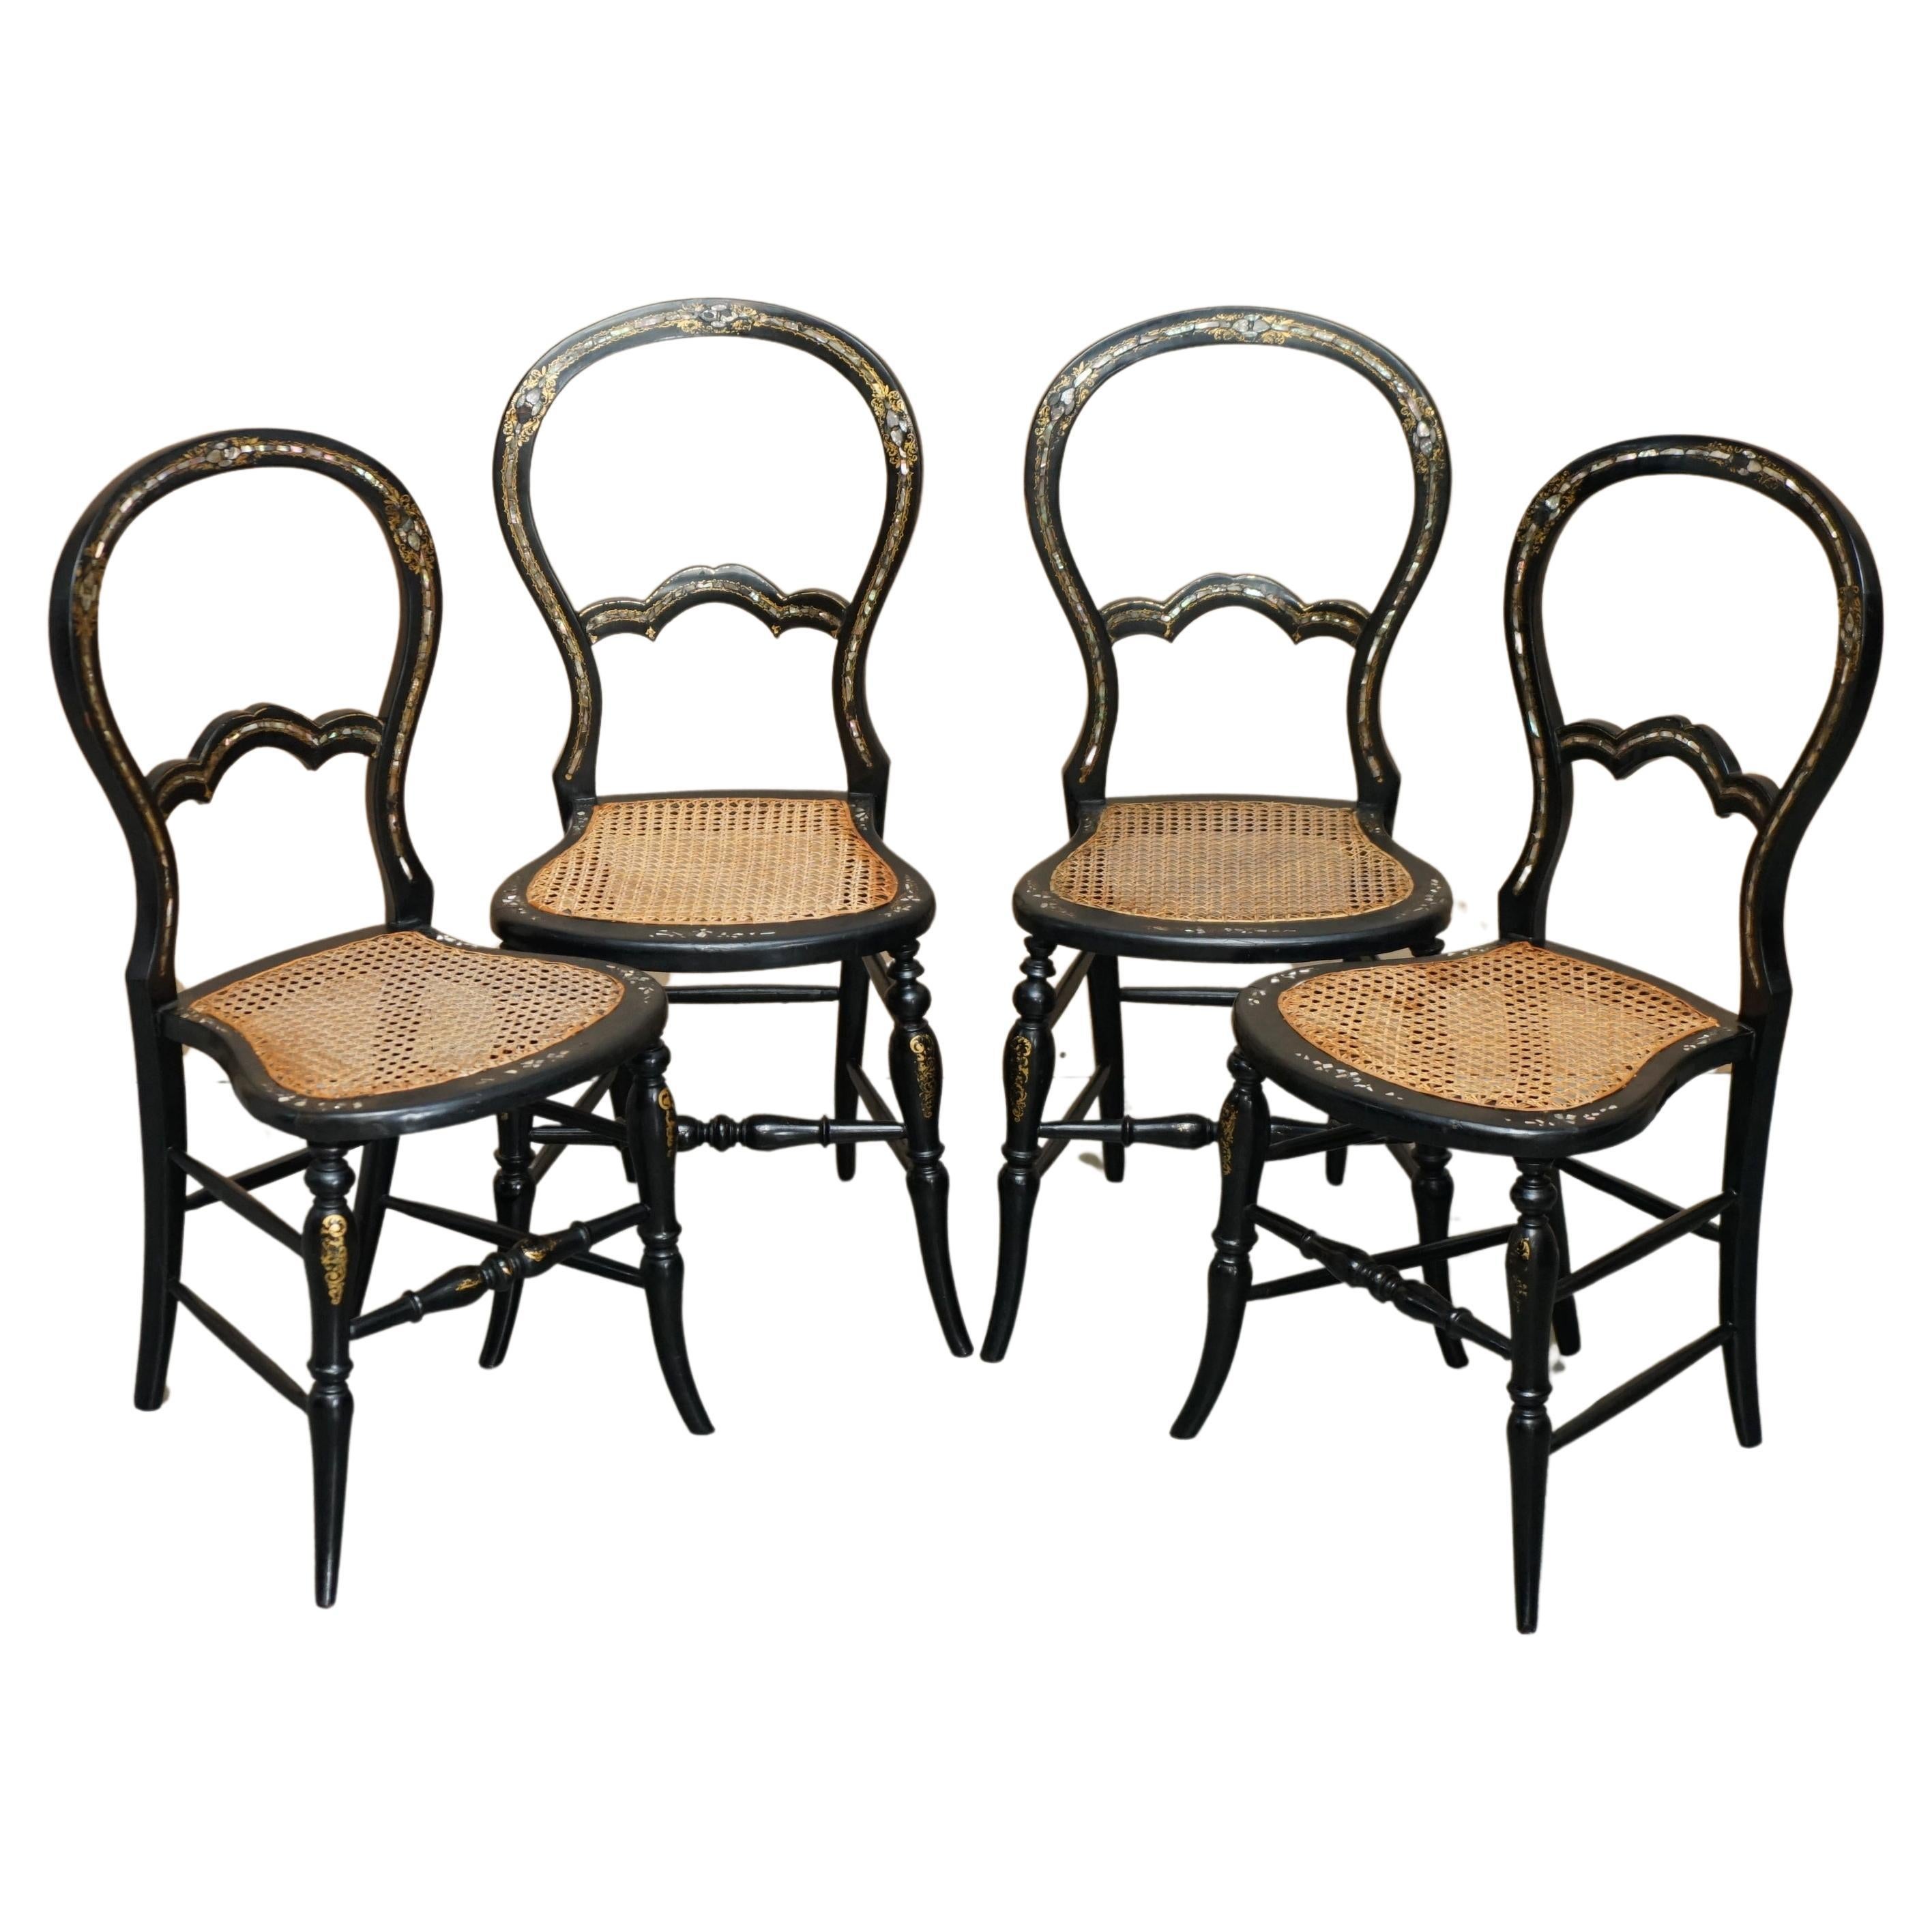 OUR FINE AND ANTIQUE REGENCY BERGERE MOTHER OF PEARL EBONISED SIDE CHAIRs